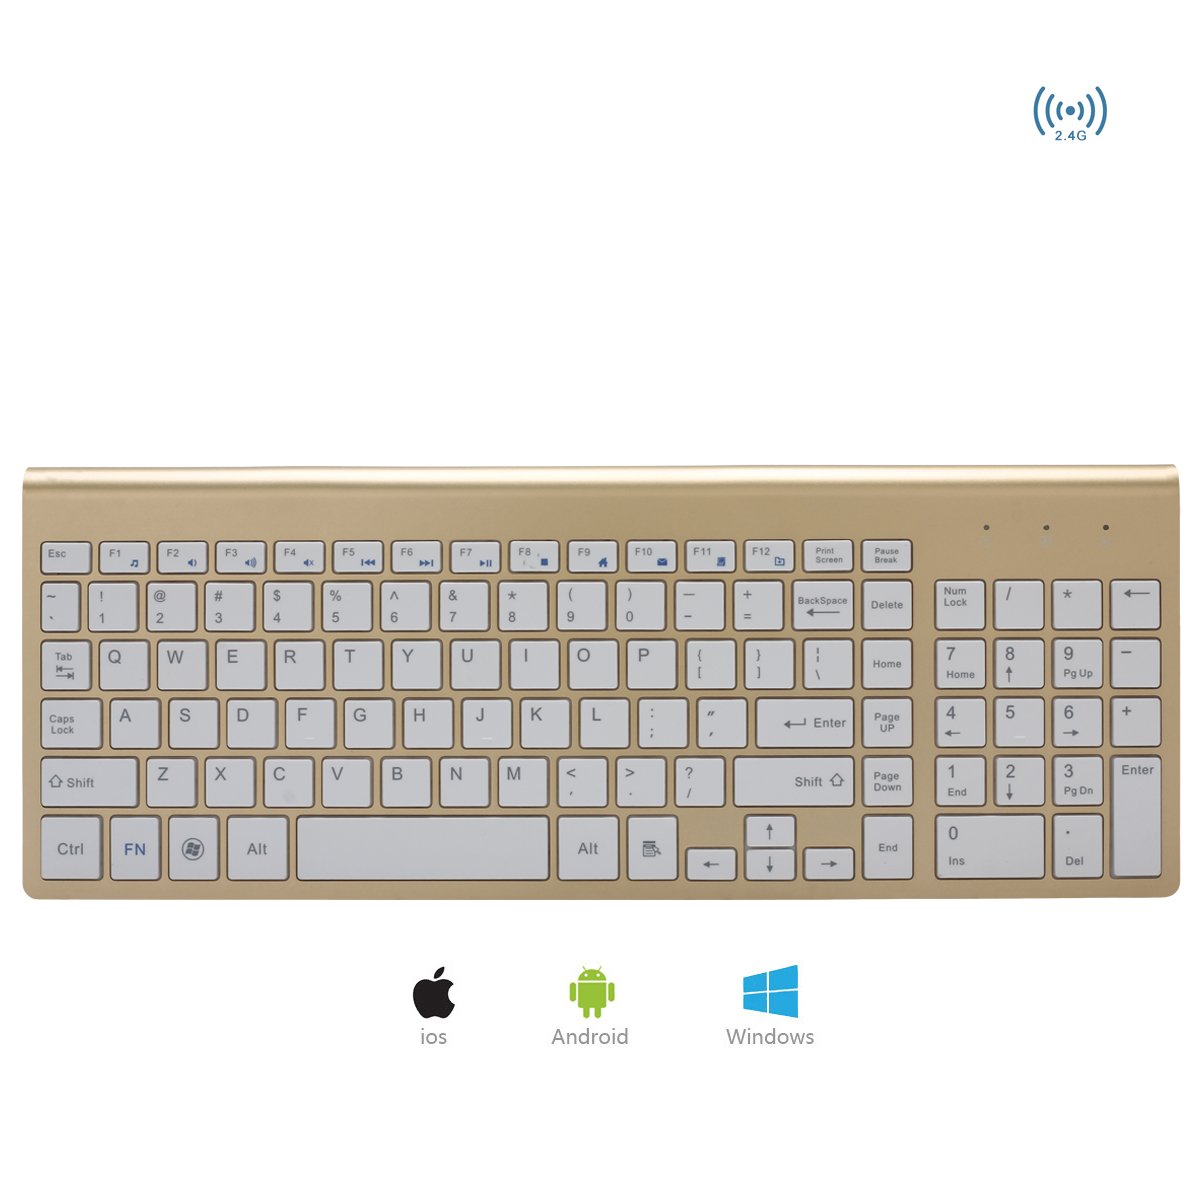 HAIBING Wireless Keyboard and Mouse Combo,Compact Full-Sized 2.4GHz Ultra Slim Wireless Keyboard with Number Pad and Power-Saving Mouse for Office Windows 10,Laptop,PC,Computer,Desktop,Gold01